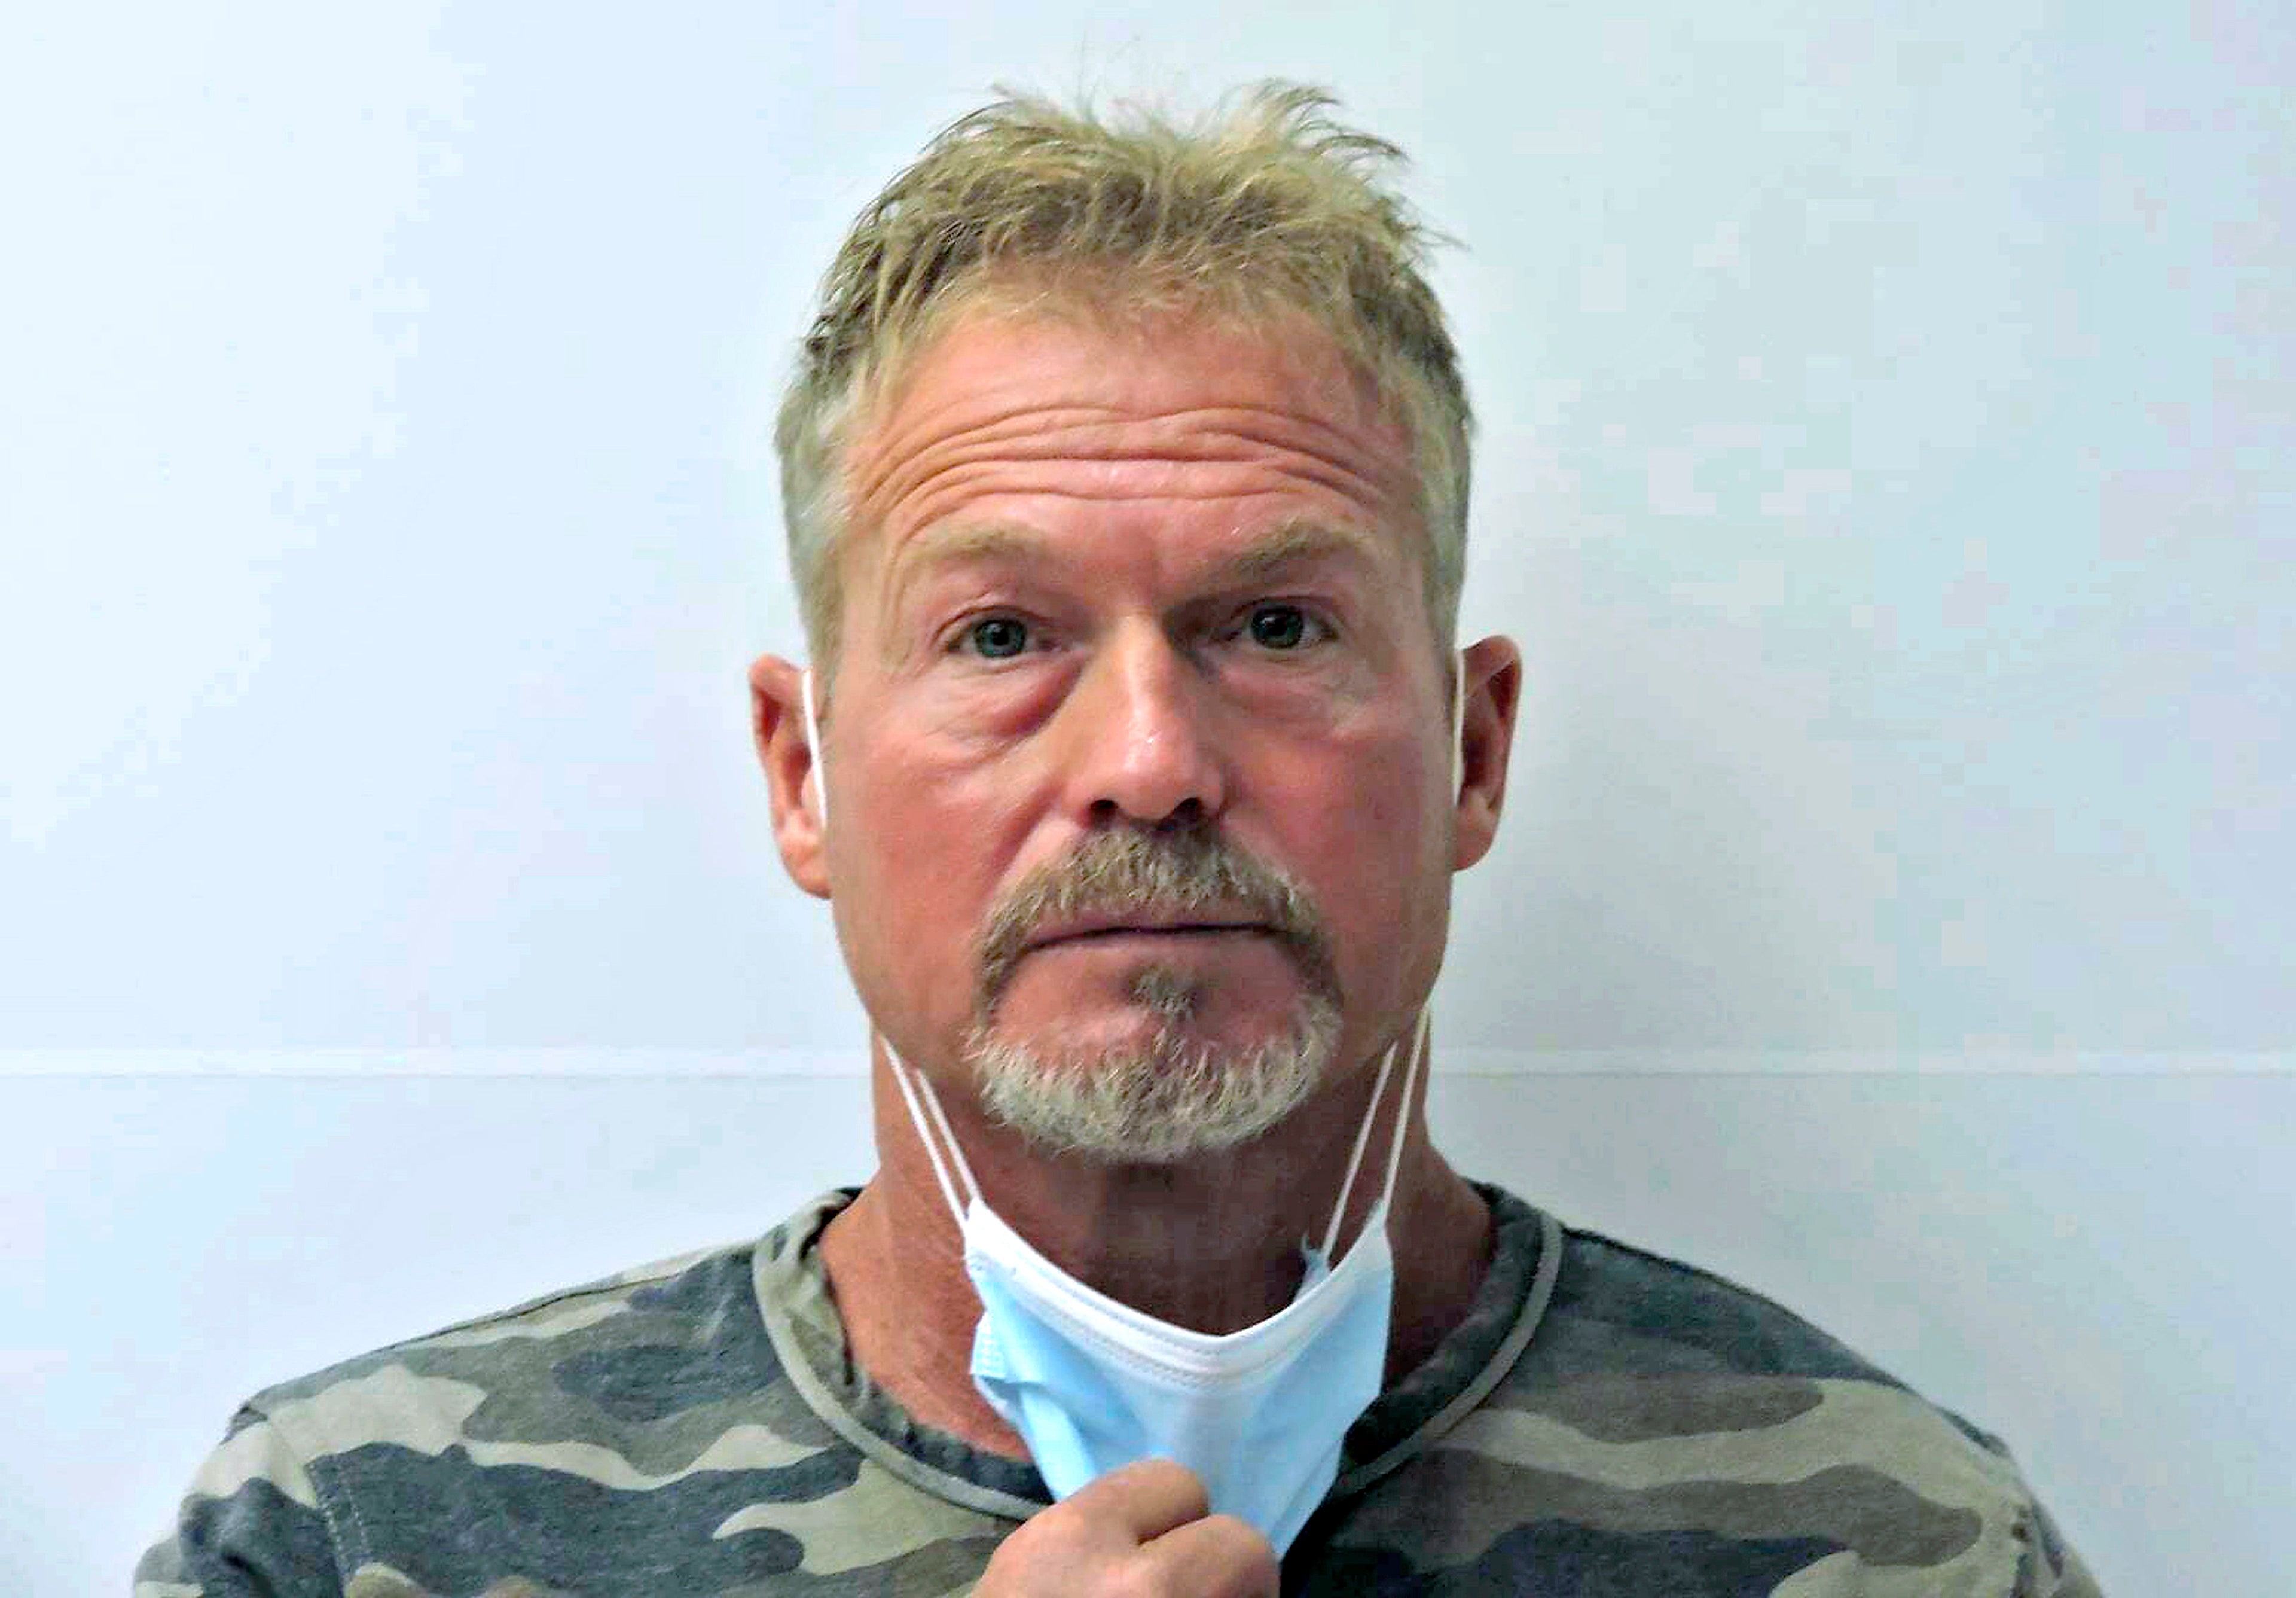 Barry Morphew is pictured in his mugshot